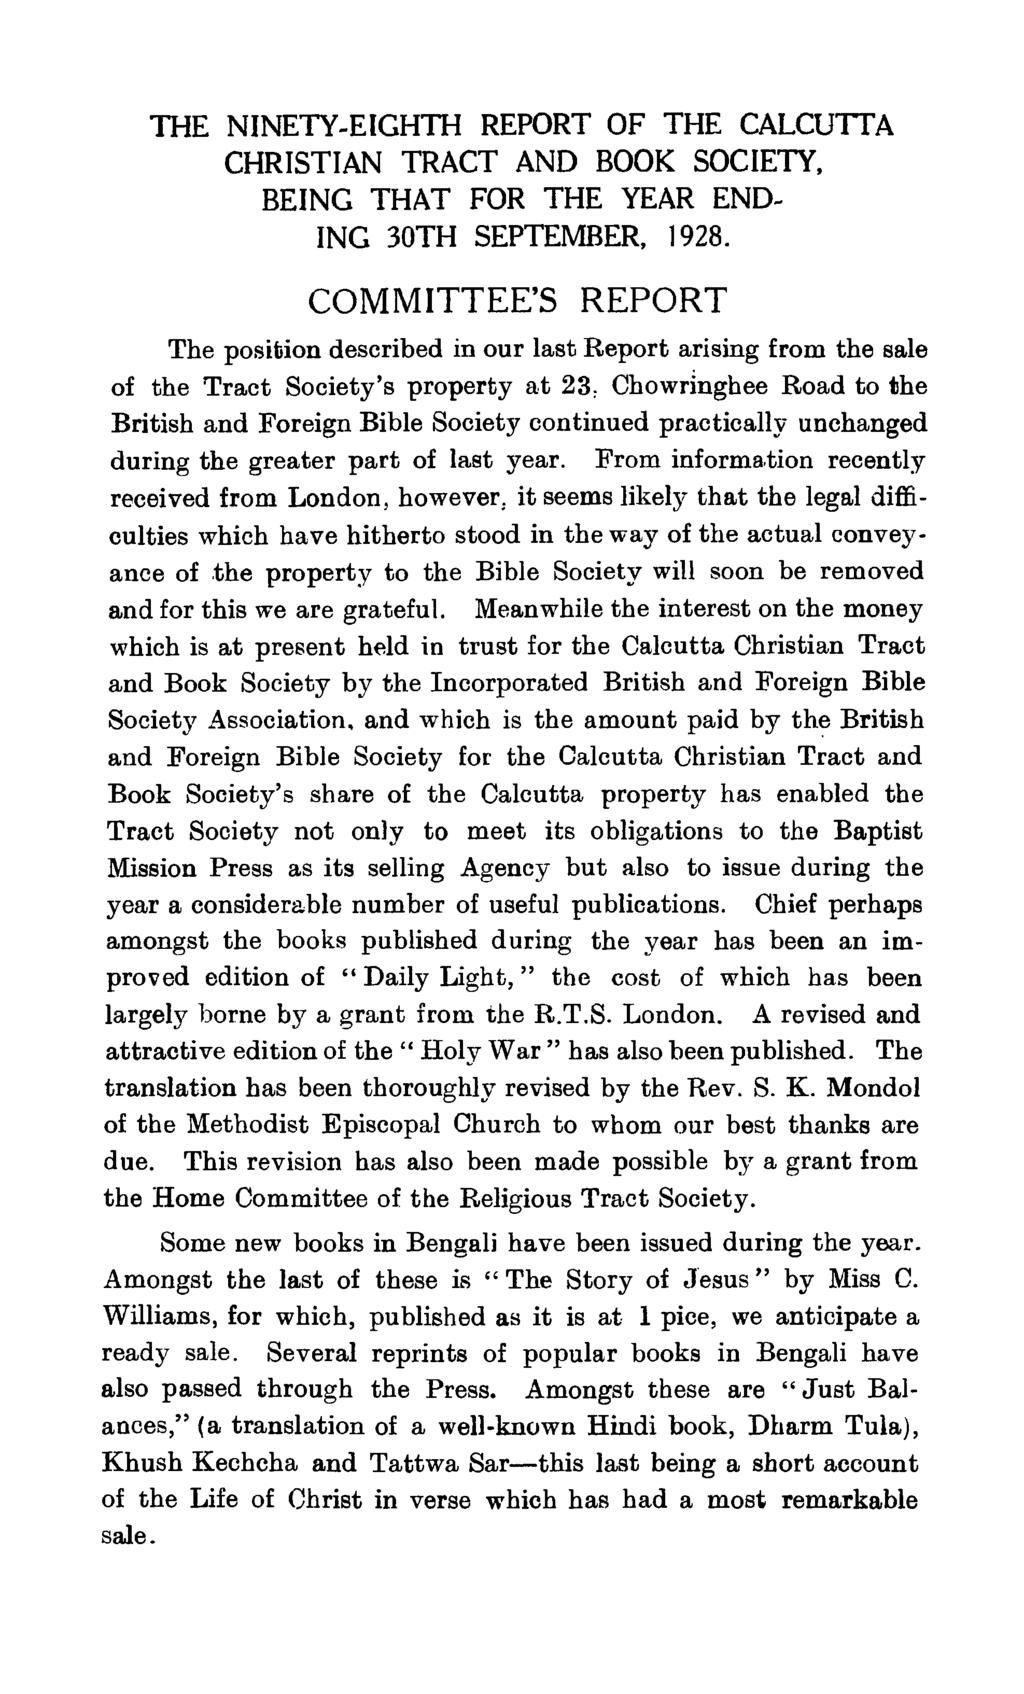 THE NINETY-EIGHTH REPORT OF THE CALCUTTA CHRISTIAN TRACT AND BOOK SOCIETY, BEING THAT FOR THE YEAR END- ING 30TH SEPTEMBER, 1928.